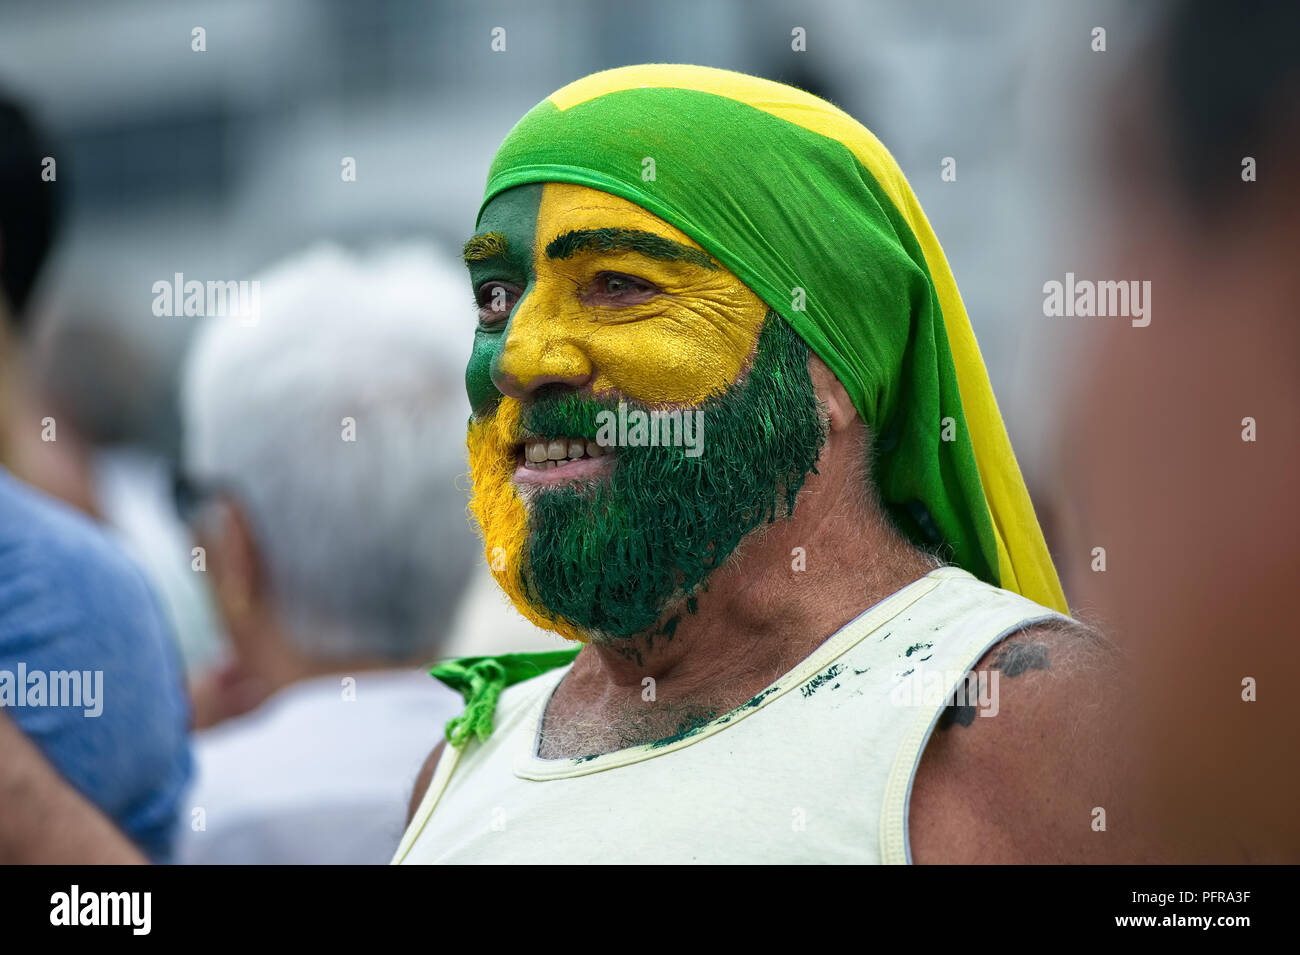 Rio de Janeiro – December 4, 2016: A Brazil protester, his face painted with the national colors, takes part in a demonstration against corruption Stock Photo